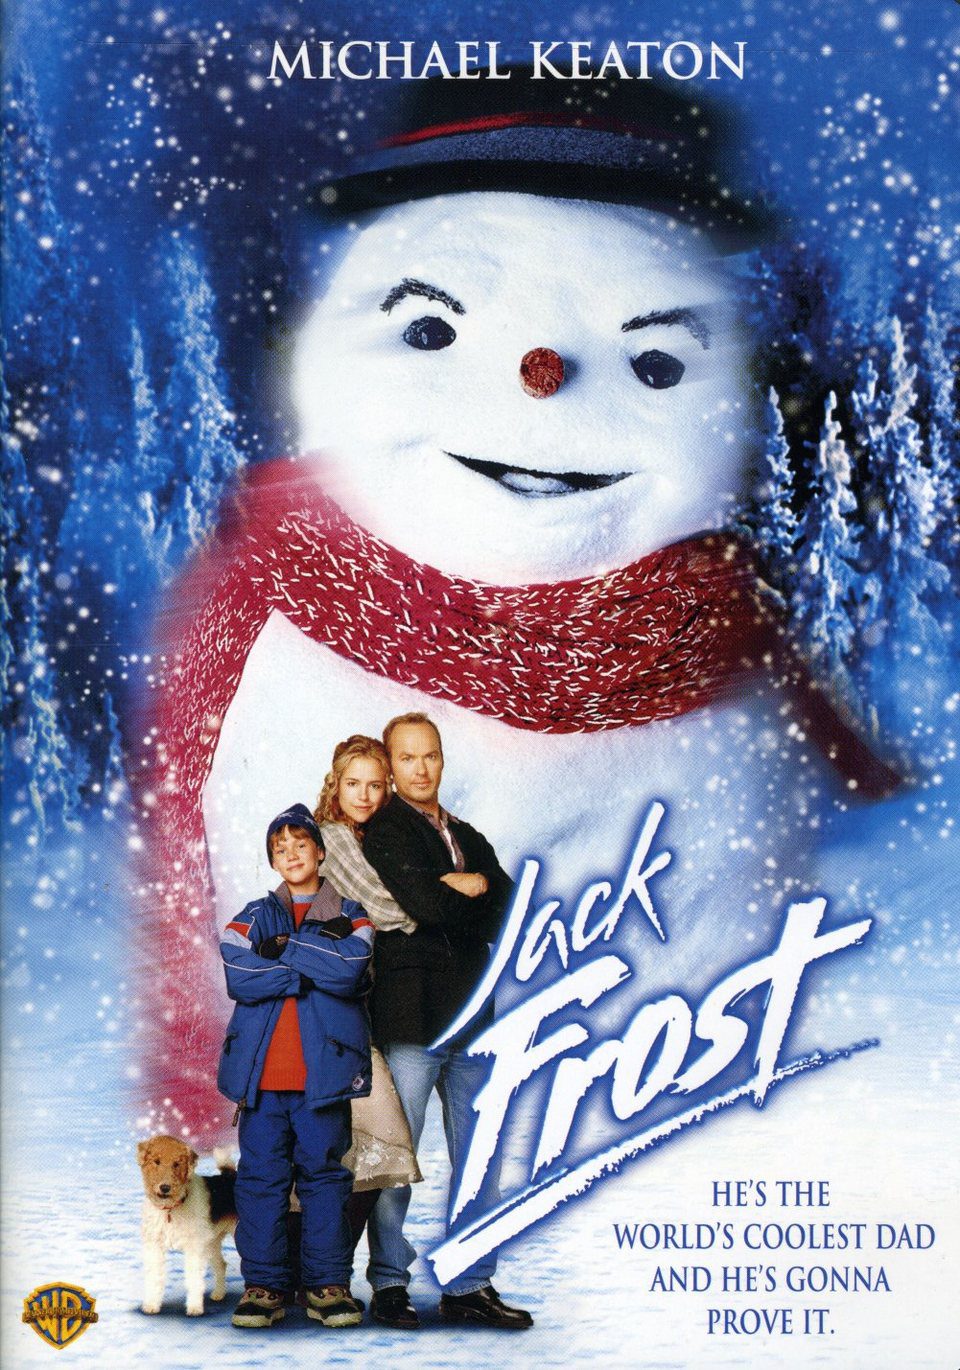 EEUU poster for Jack Frost (1998) - Movie&#39;n&#39;co